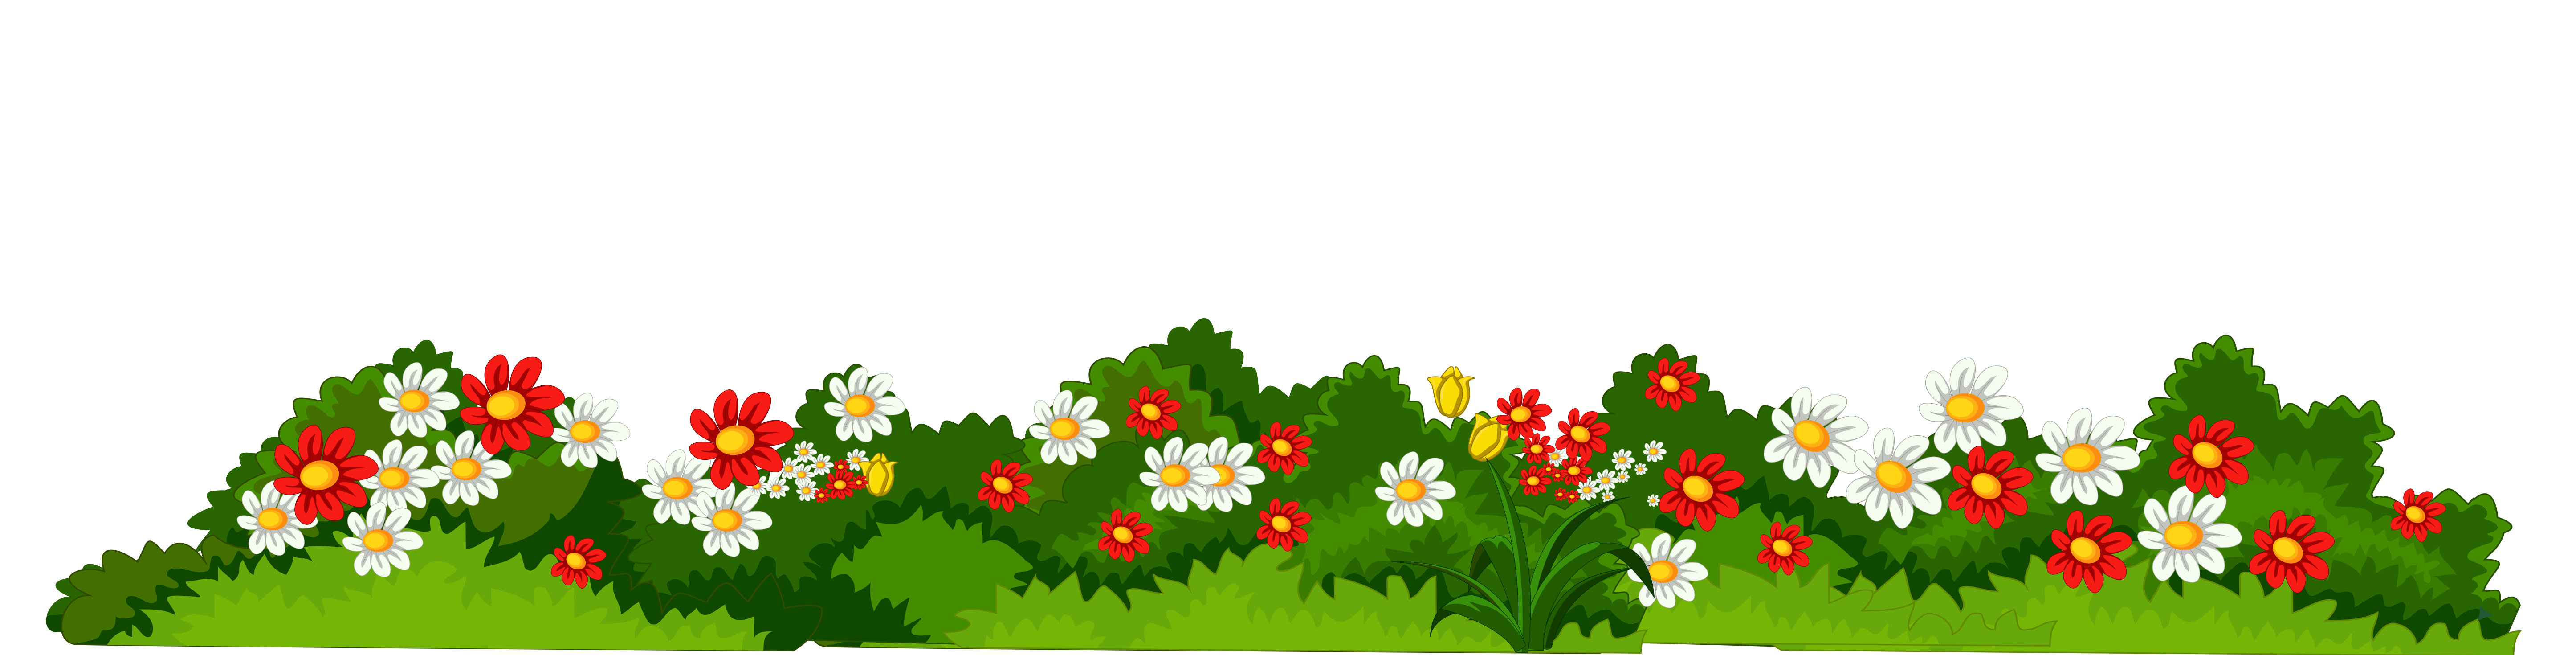 Ground clipart border. Flowers with grass transparent